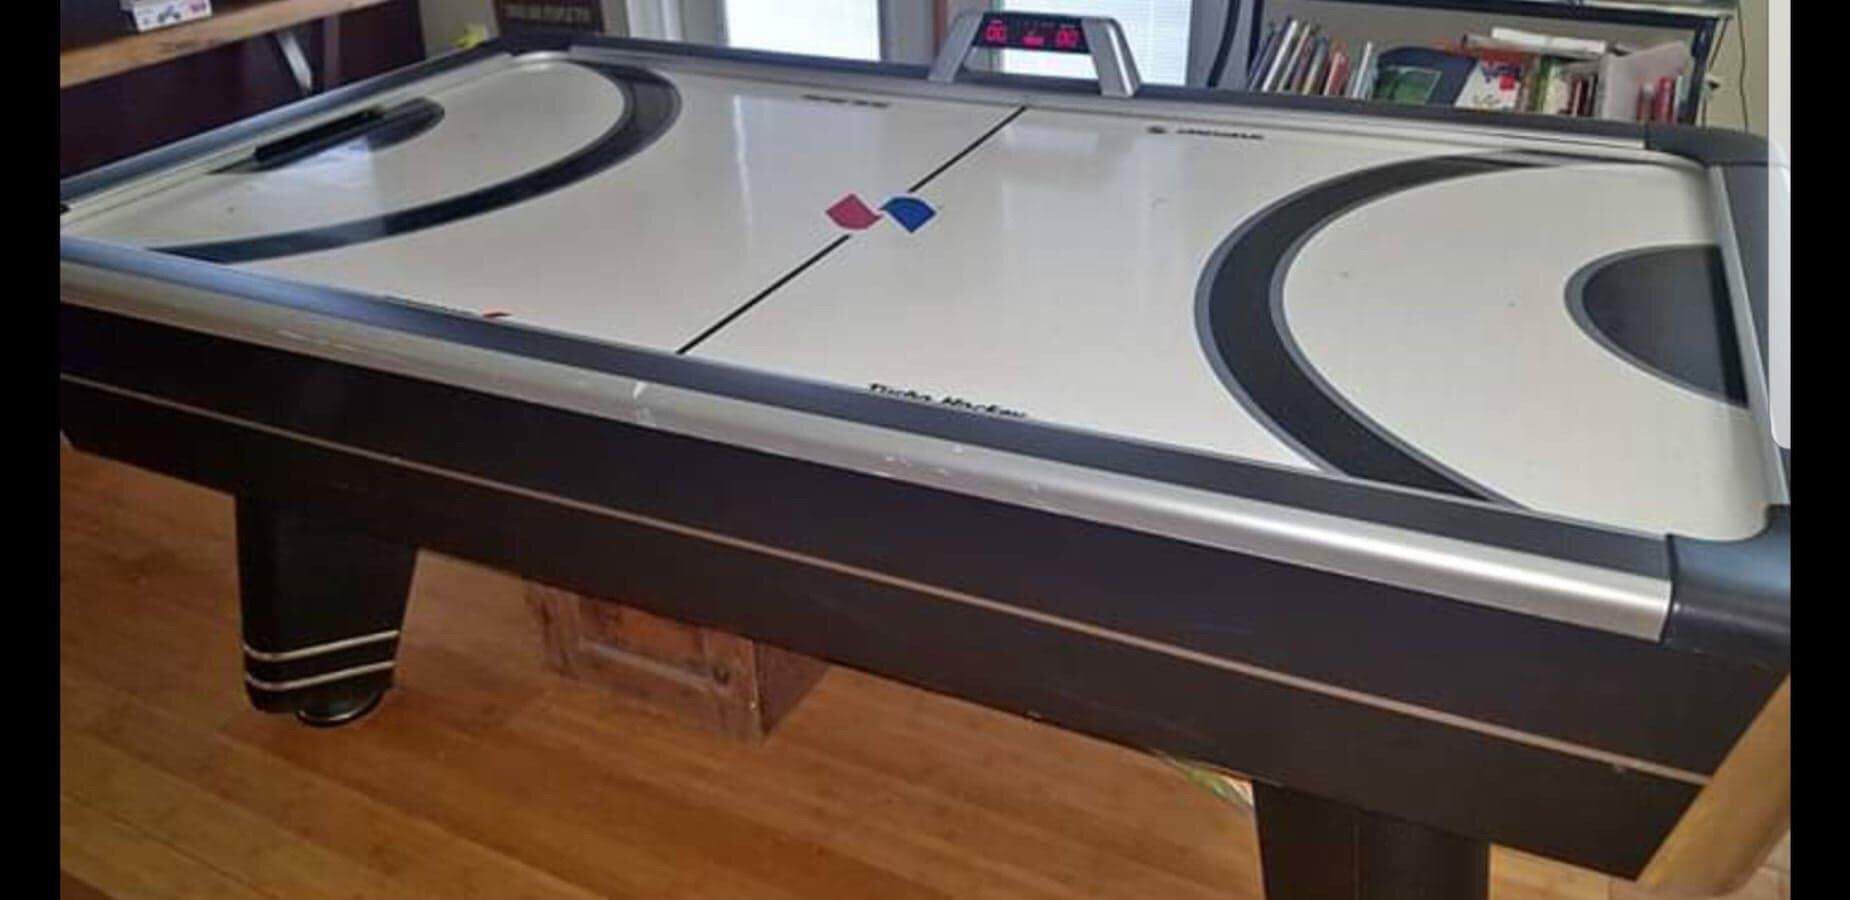 Air Hockey table - Good working condition